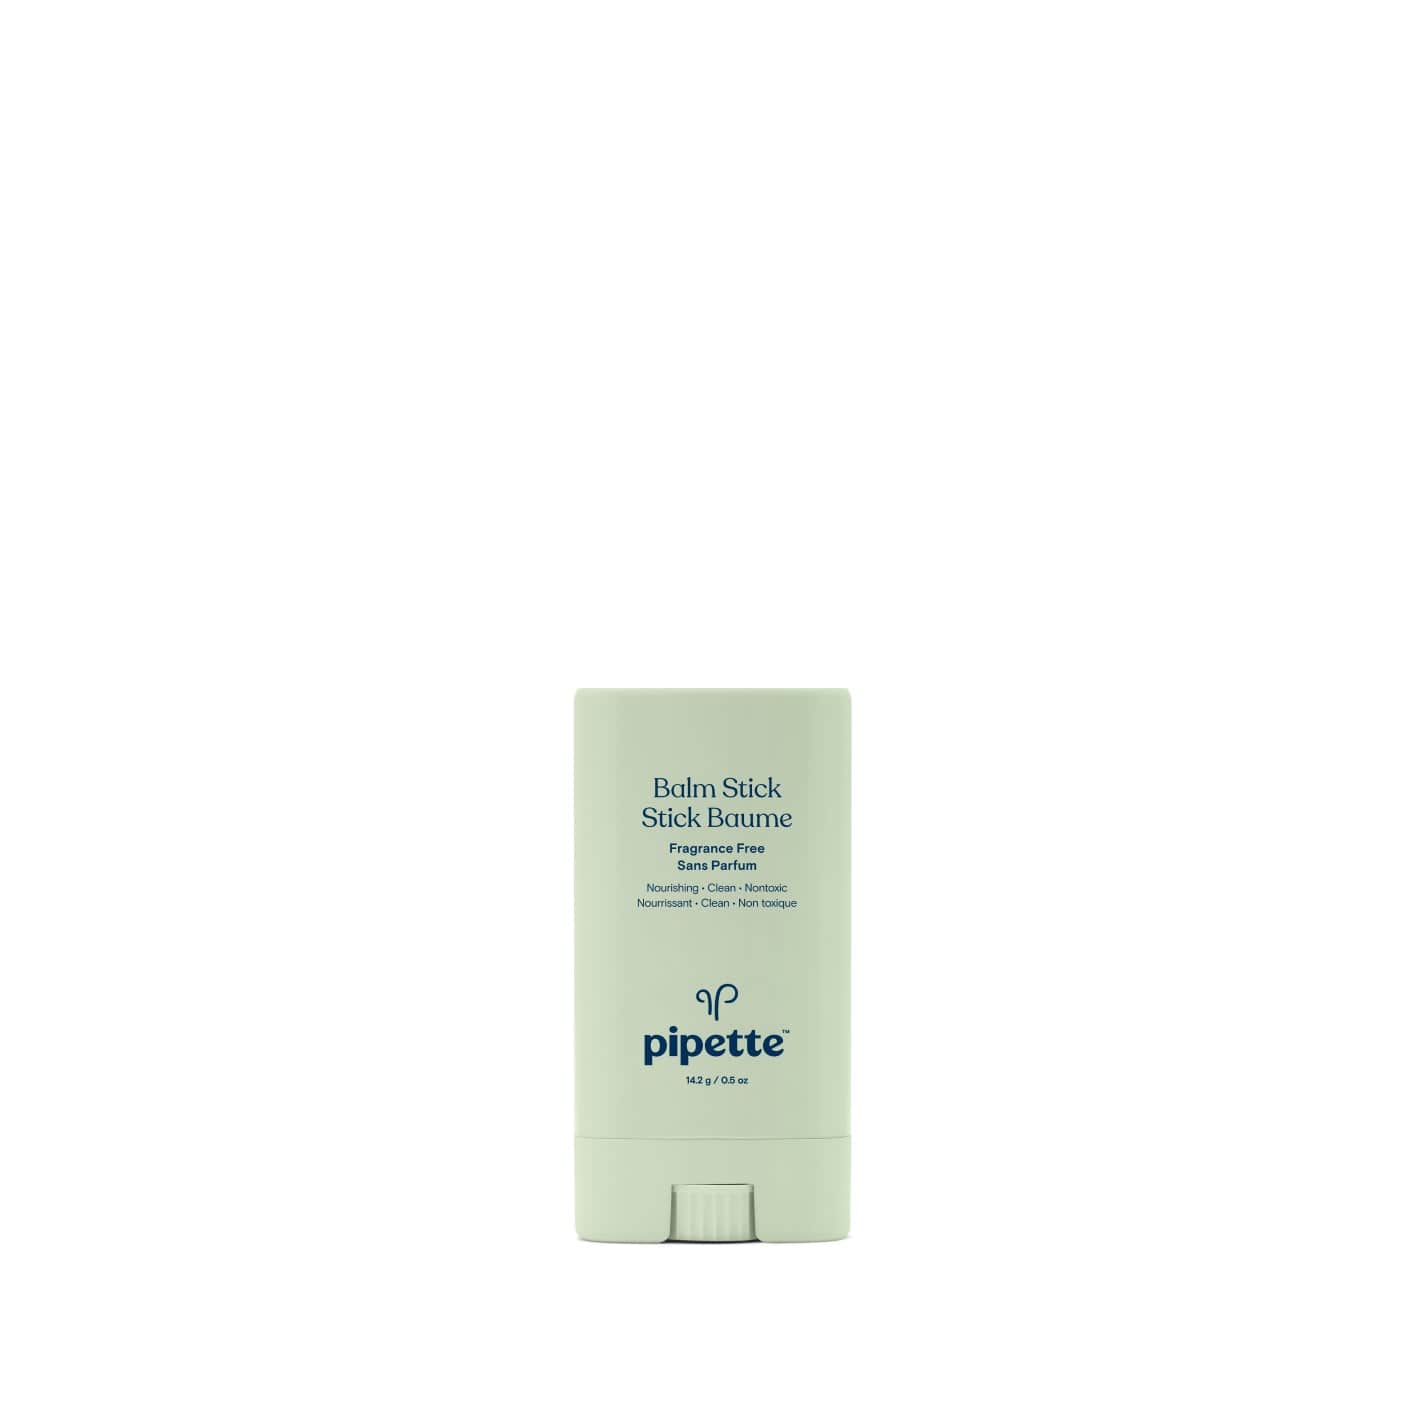 balm stick by pipette baby